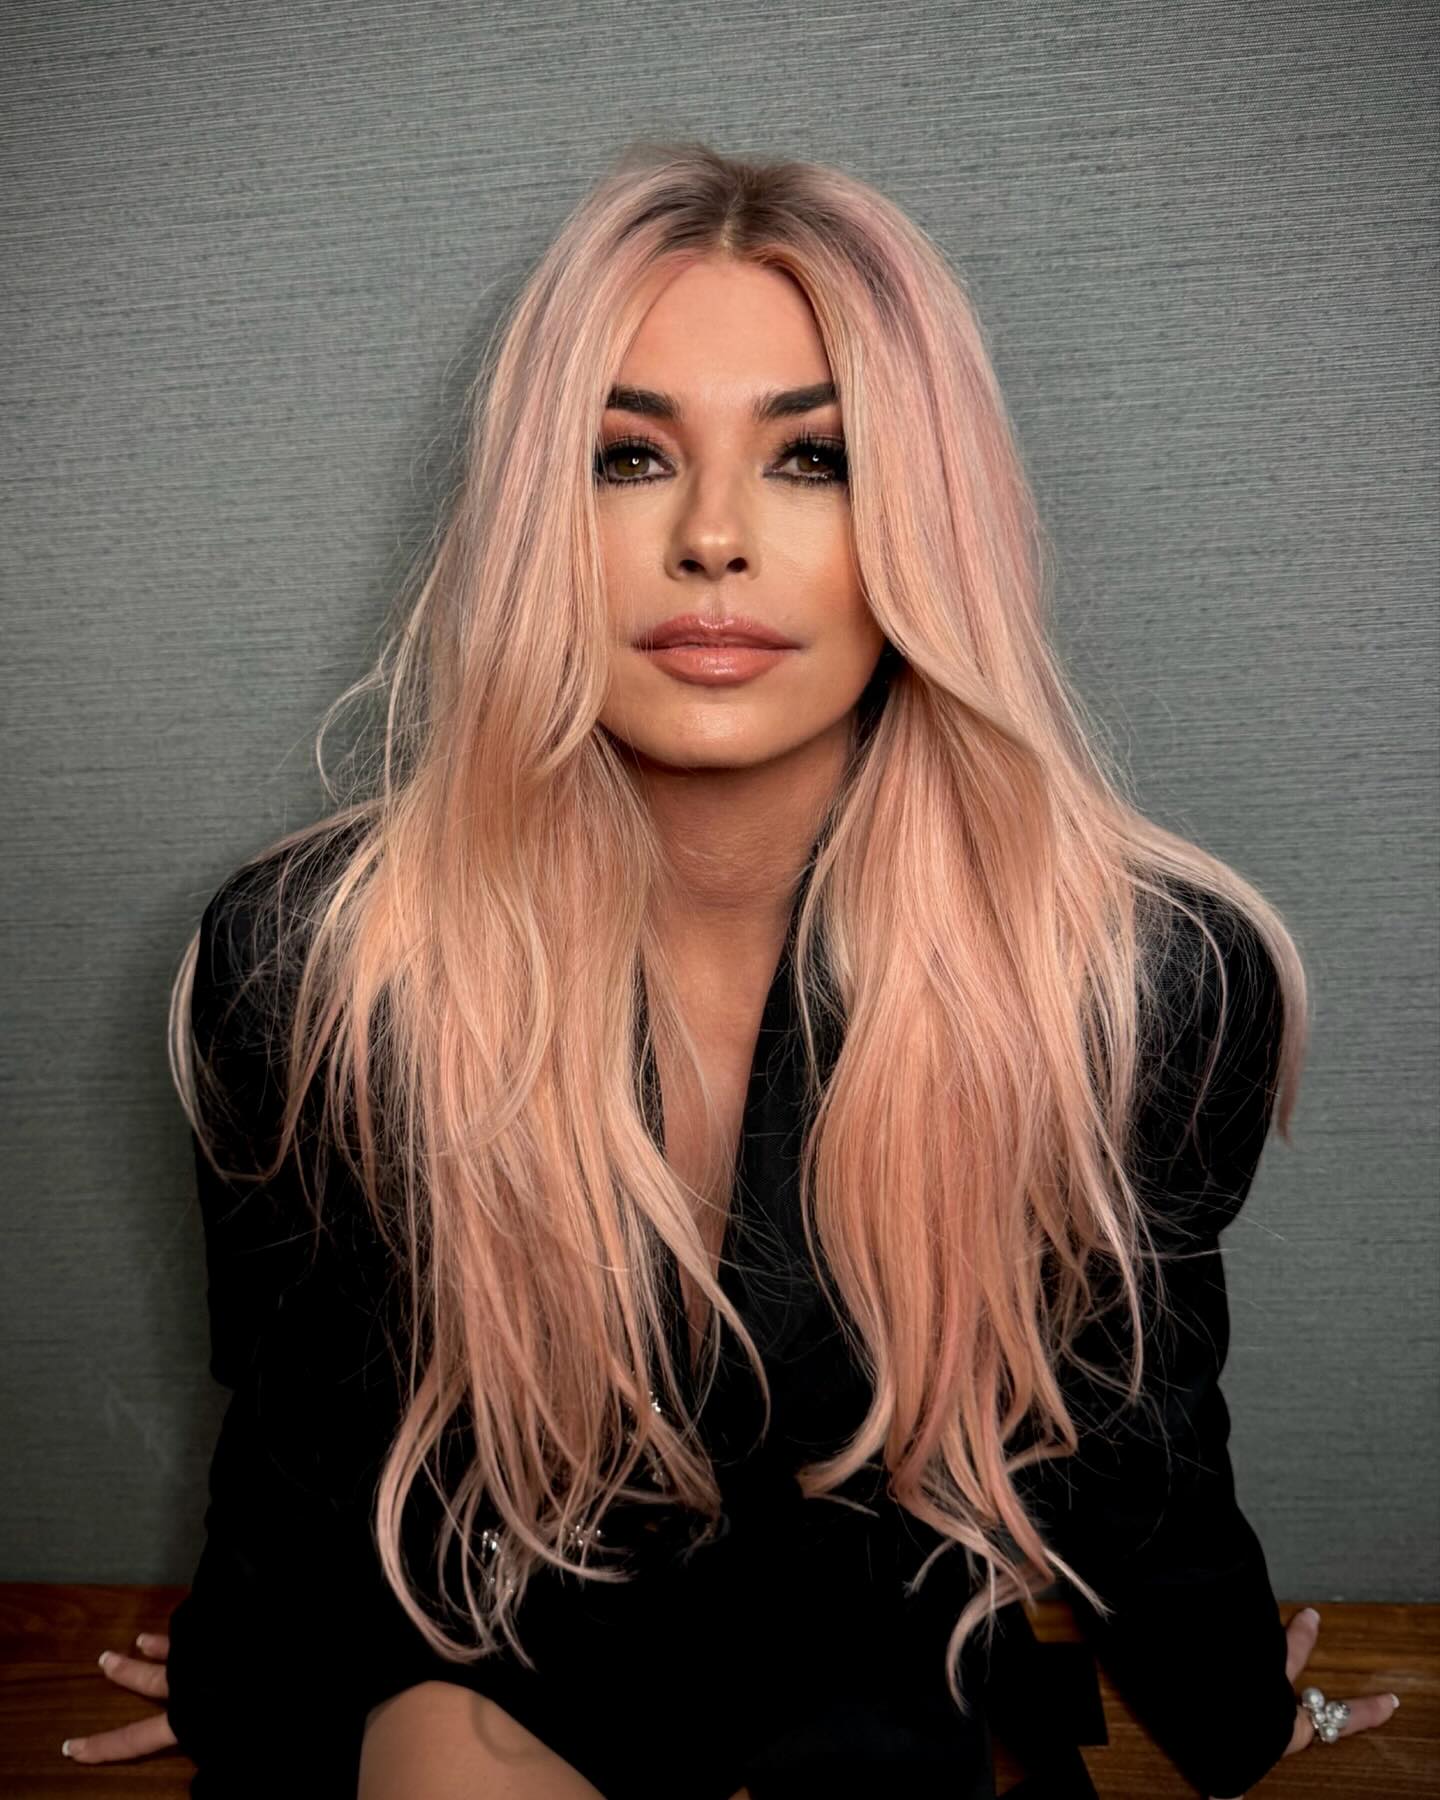 Shania experimented with pink hair back in March